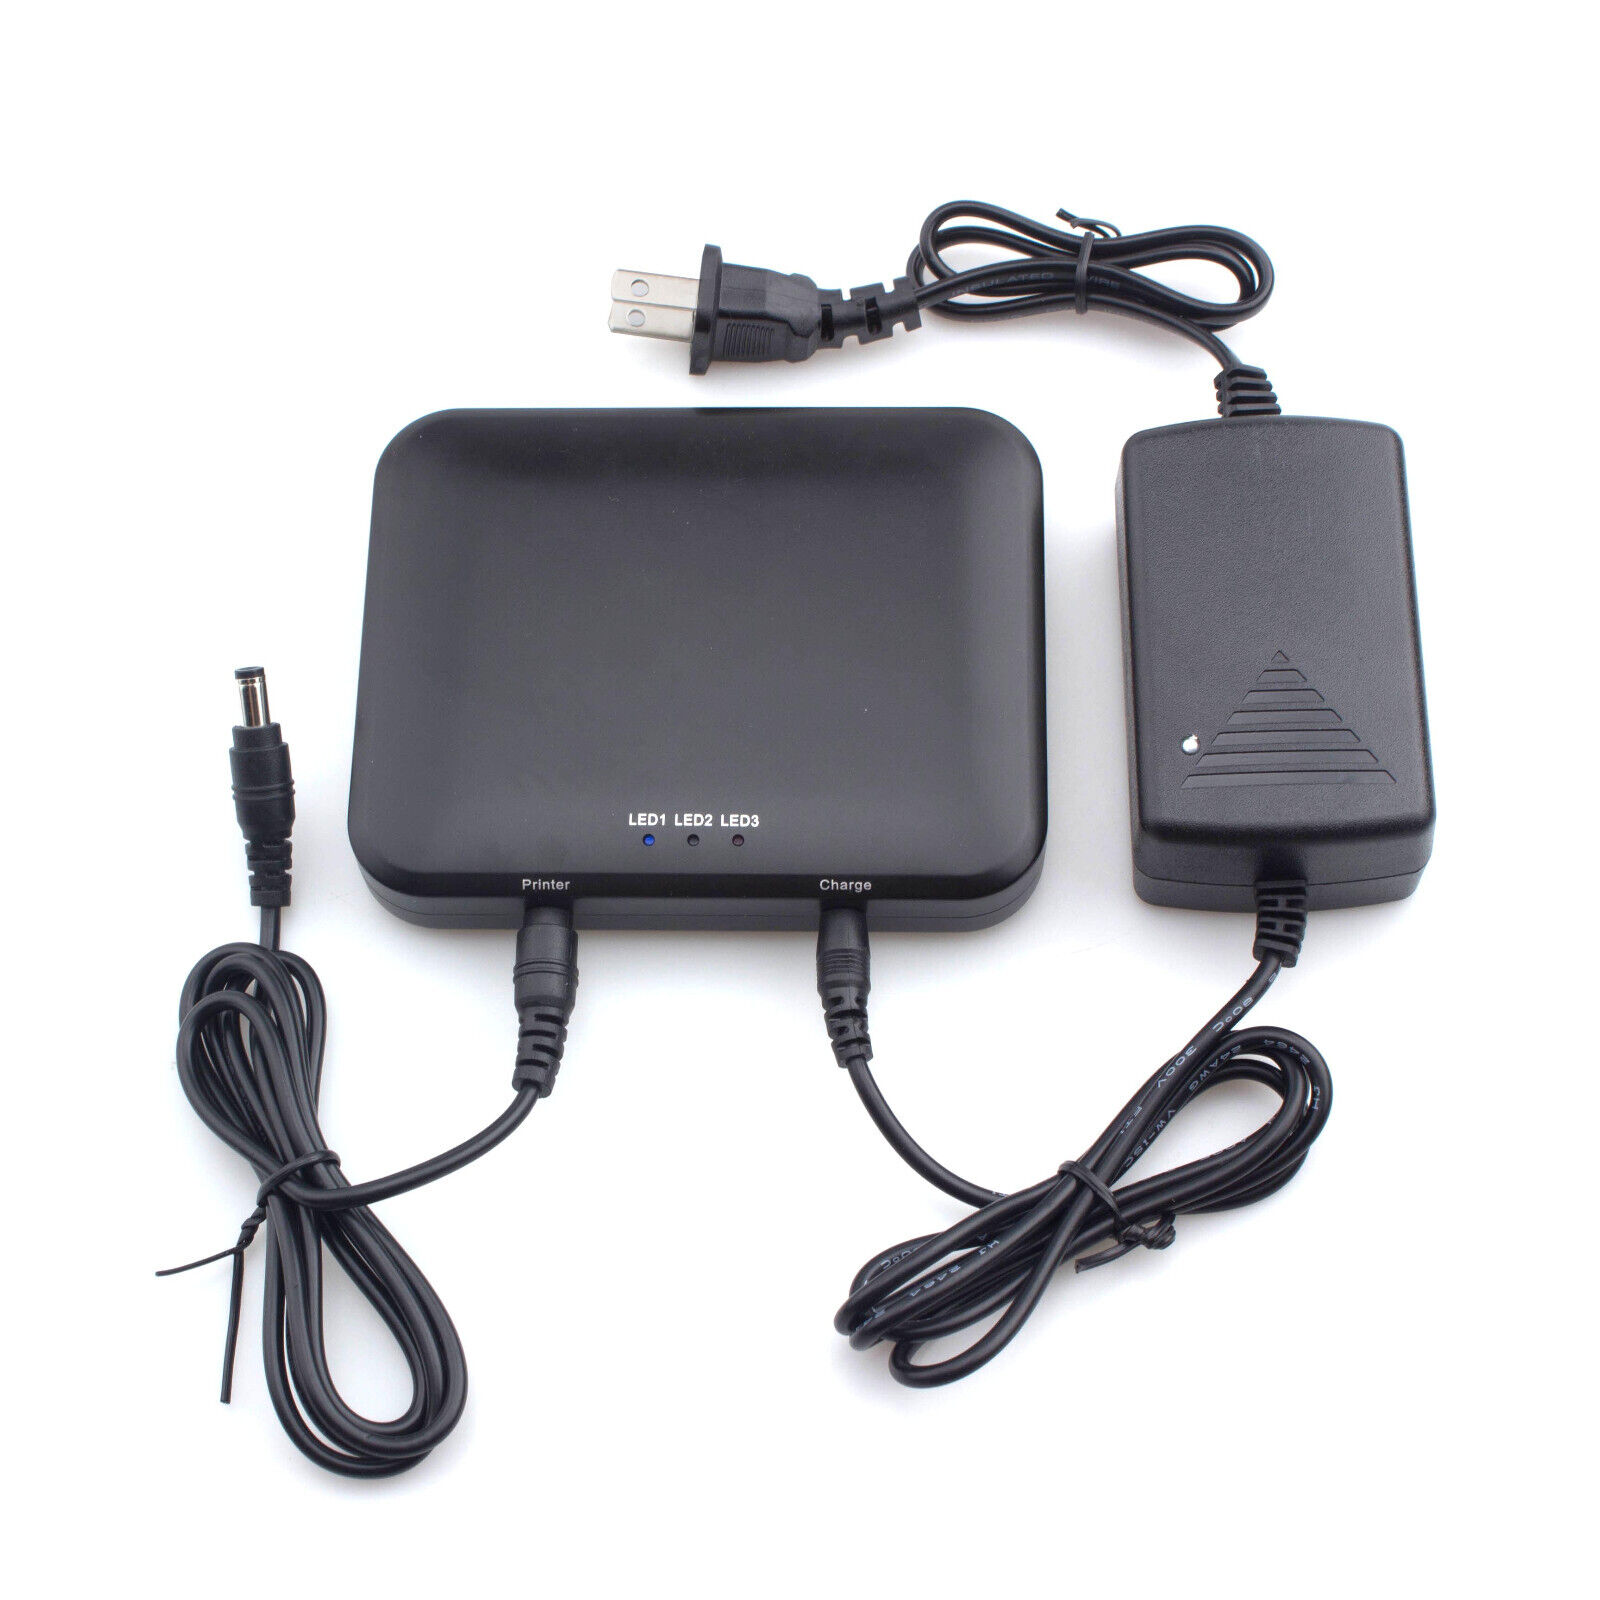 Power Bank & Charger for Canon Selphy CP1300 CP1200 CP1000 CP910 CP900 Printer